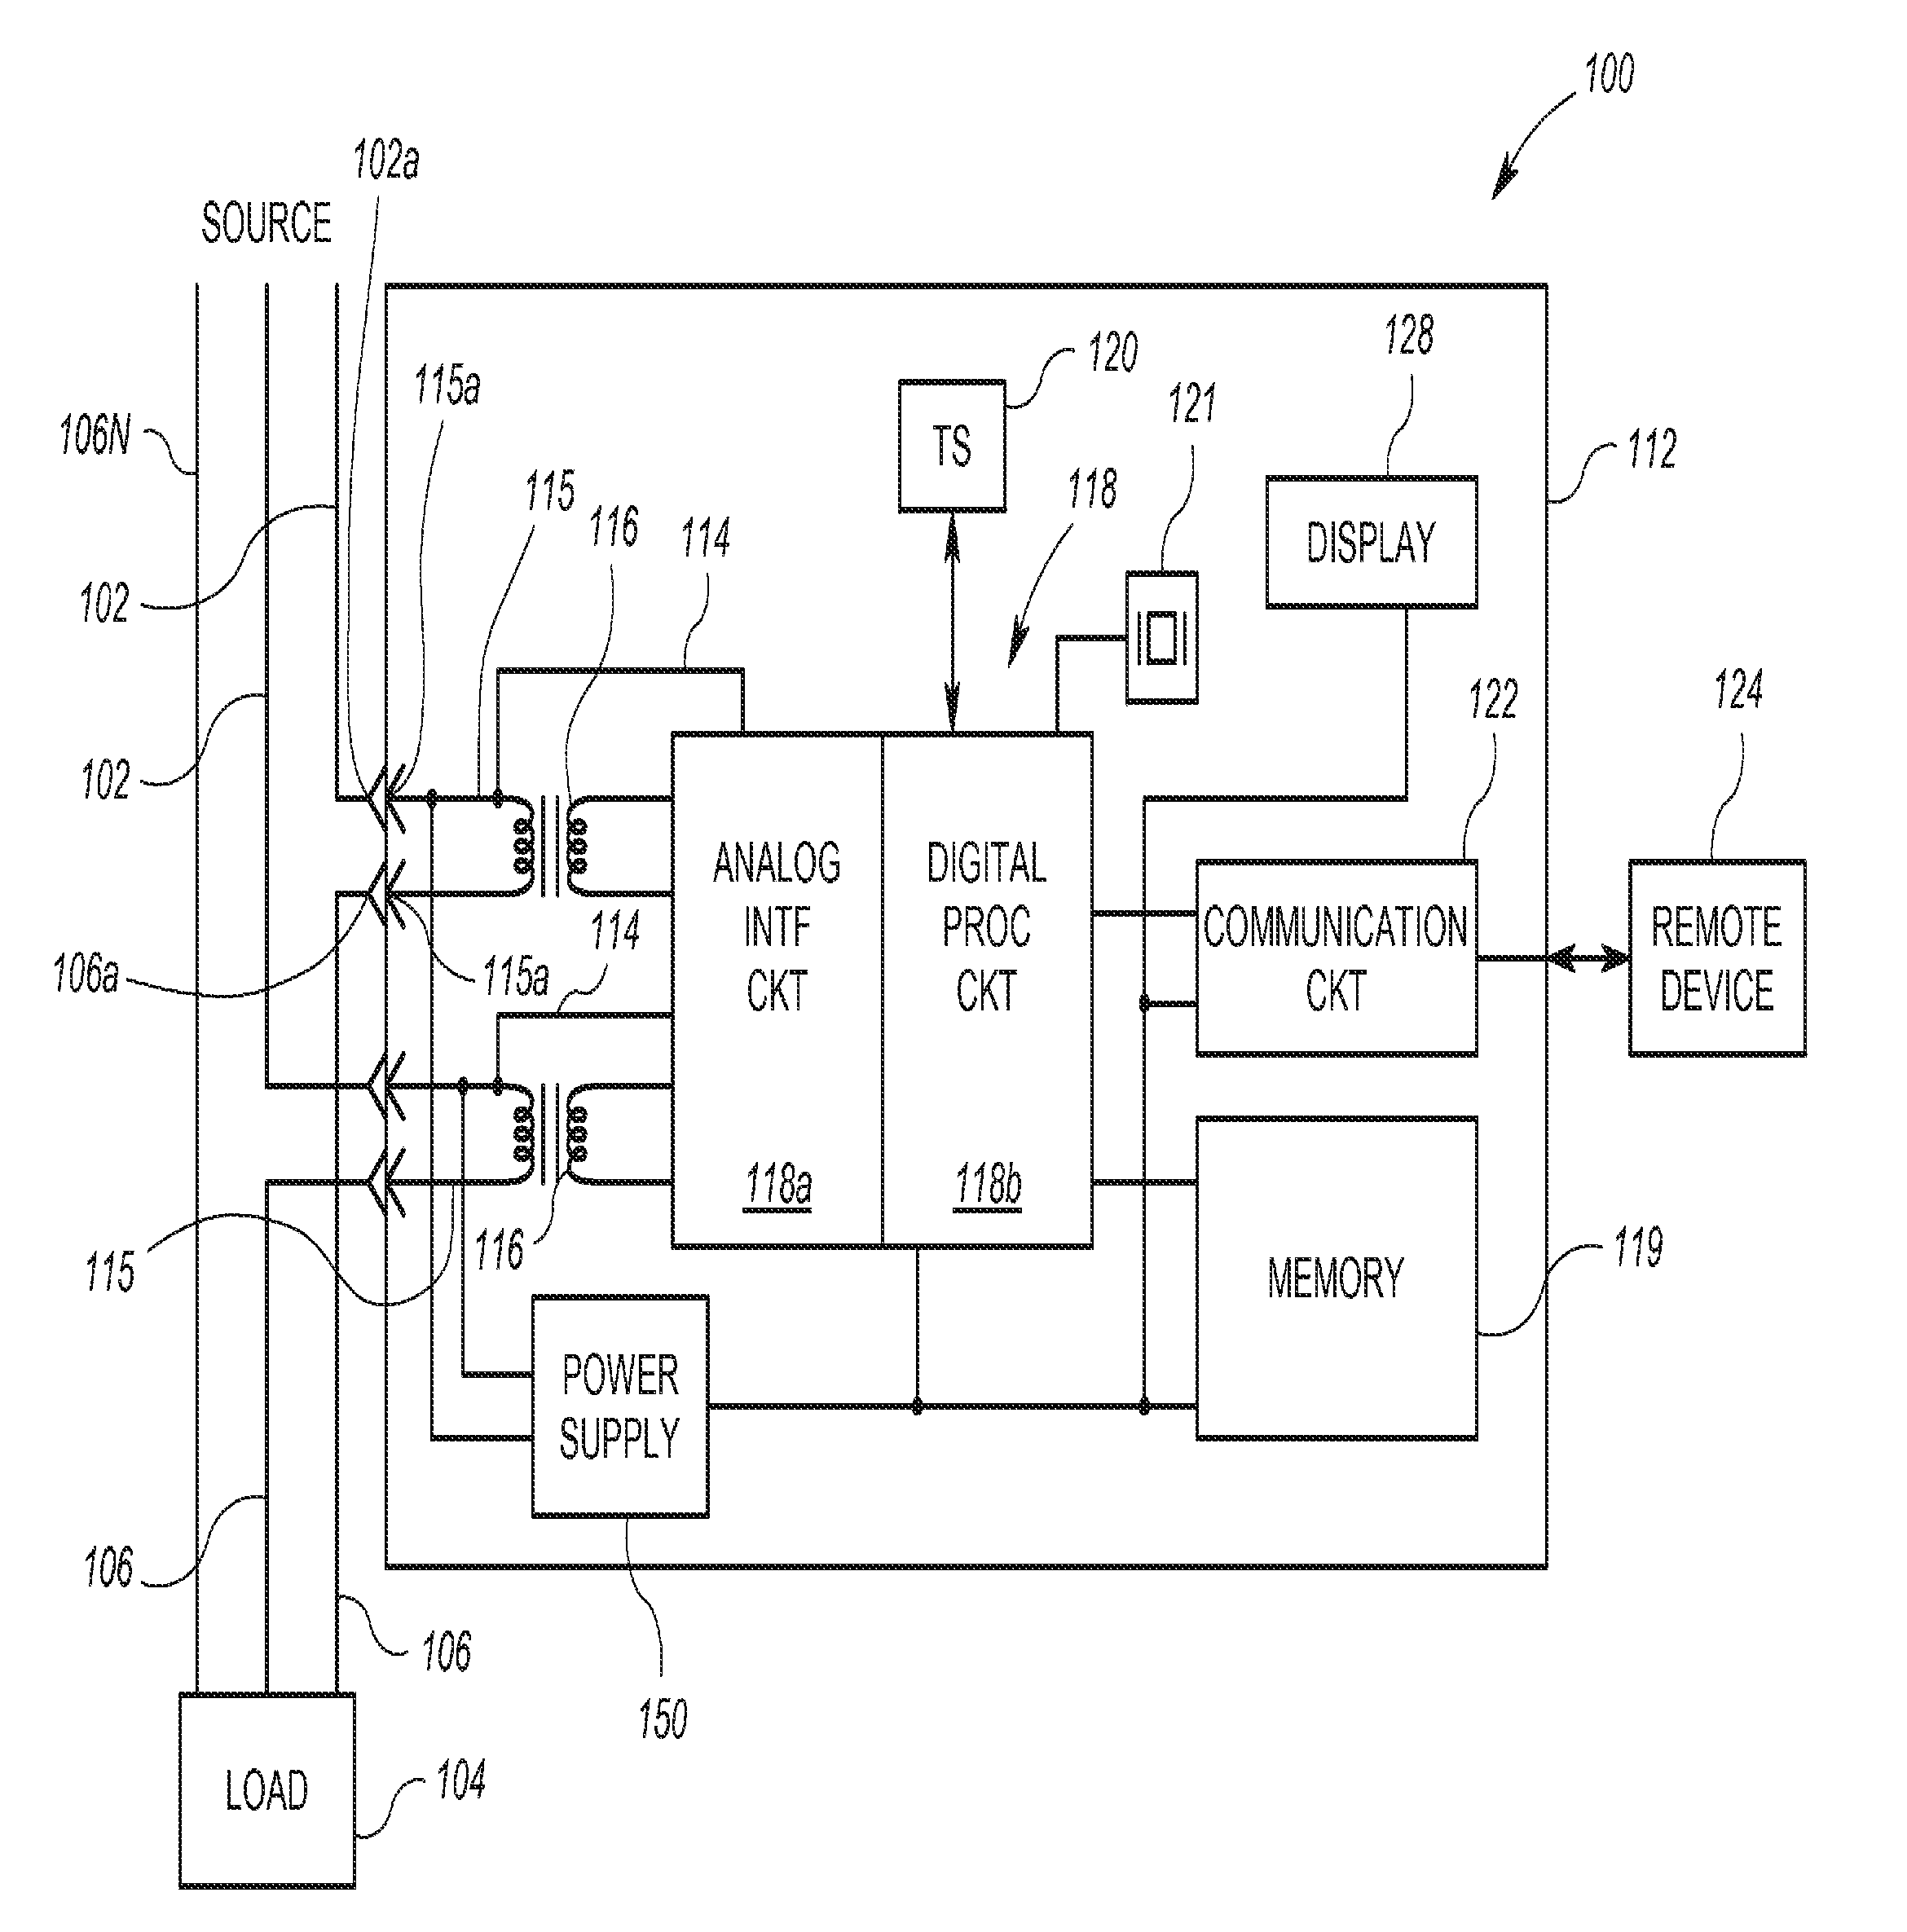 Temperature Profiling in an Electricity Meter